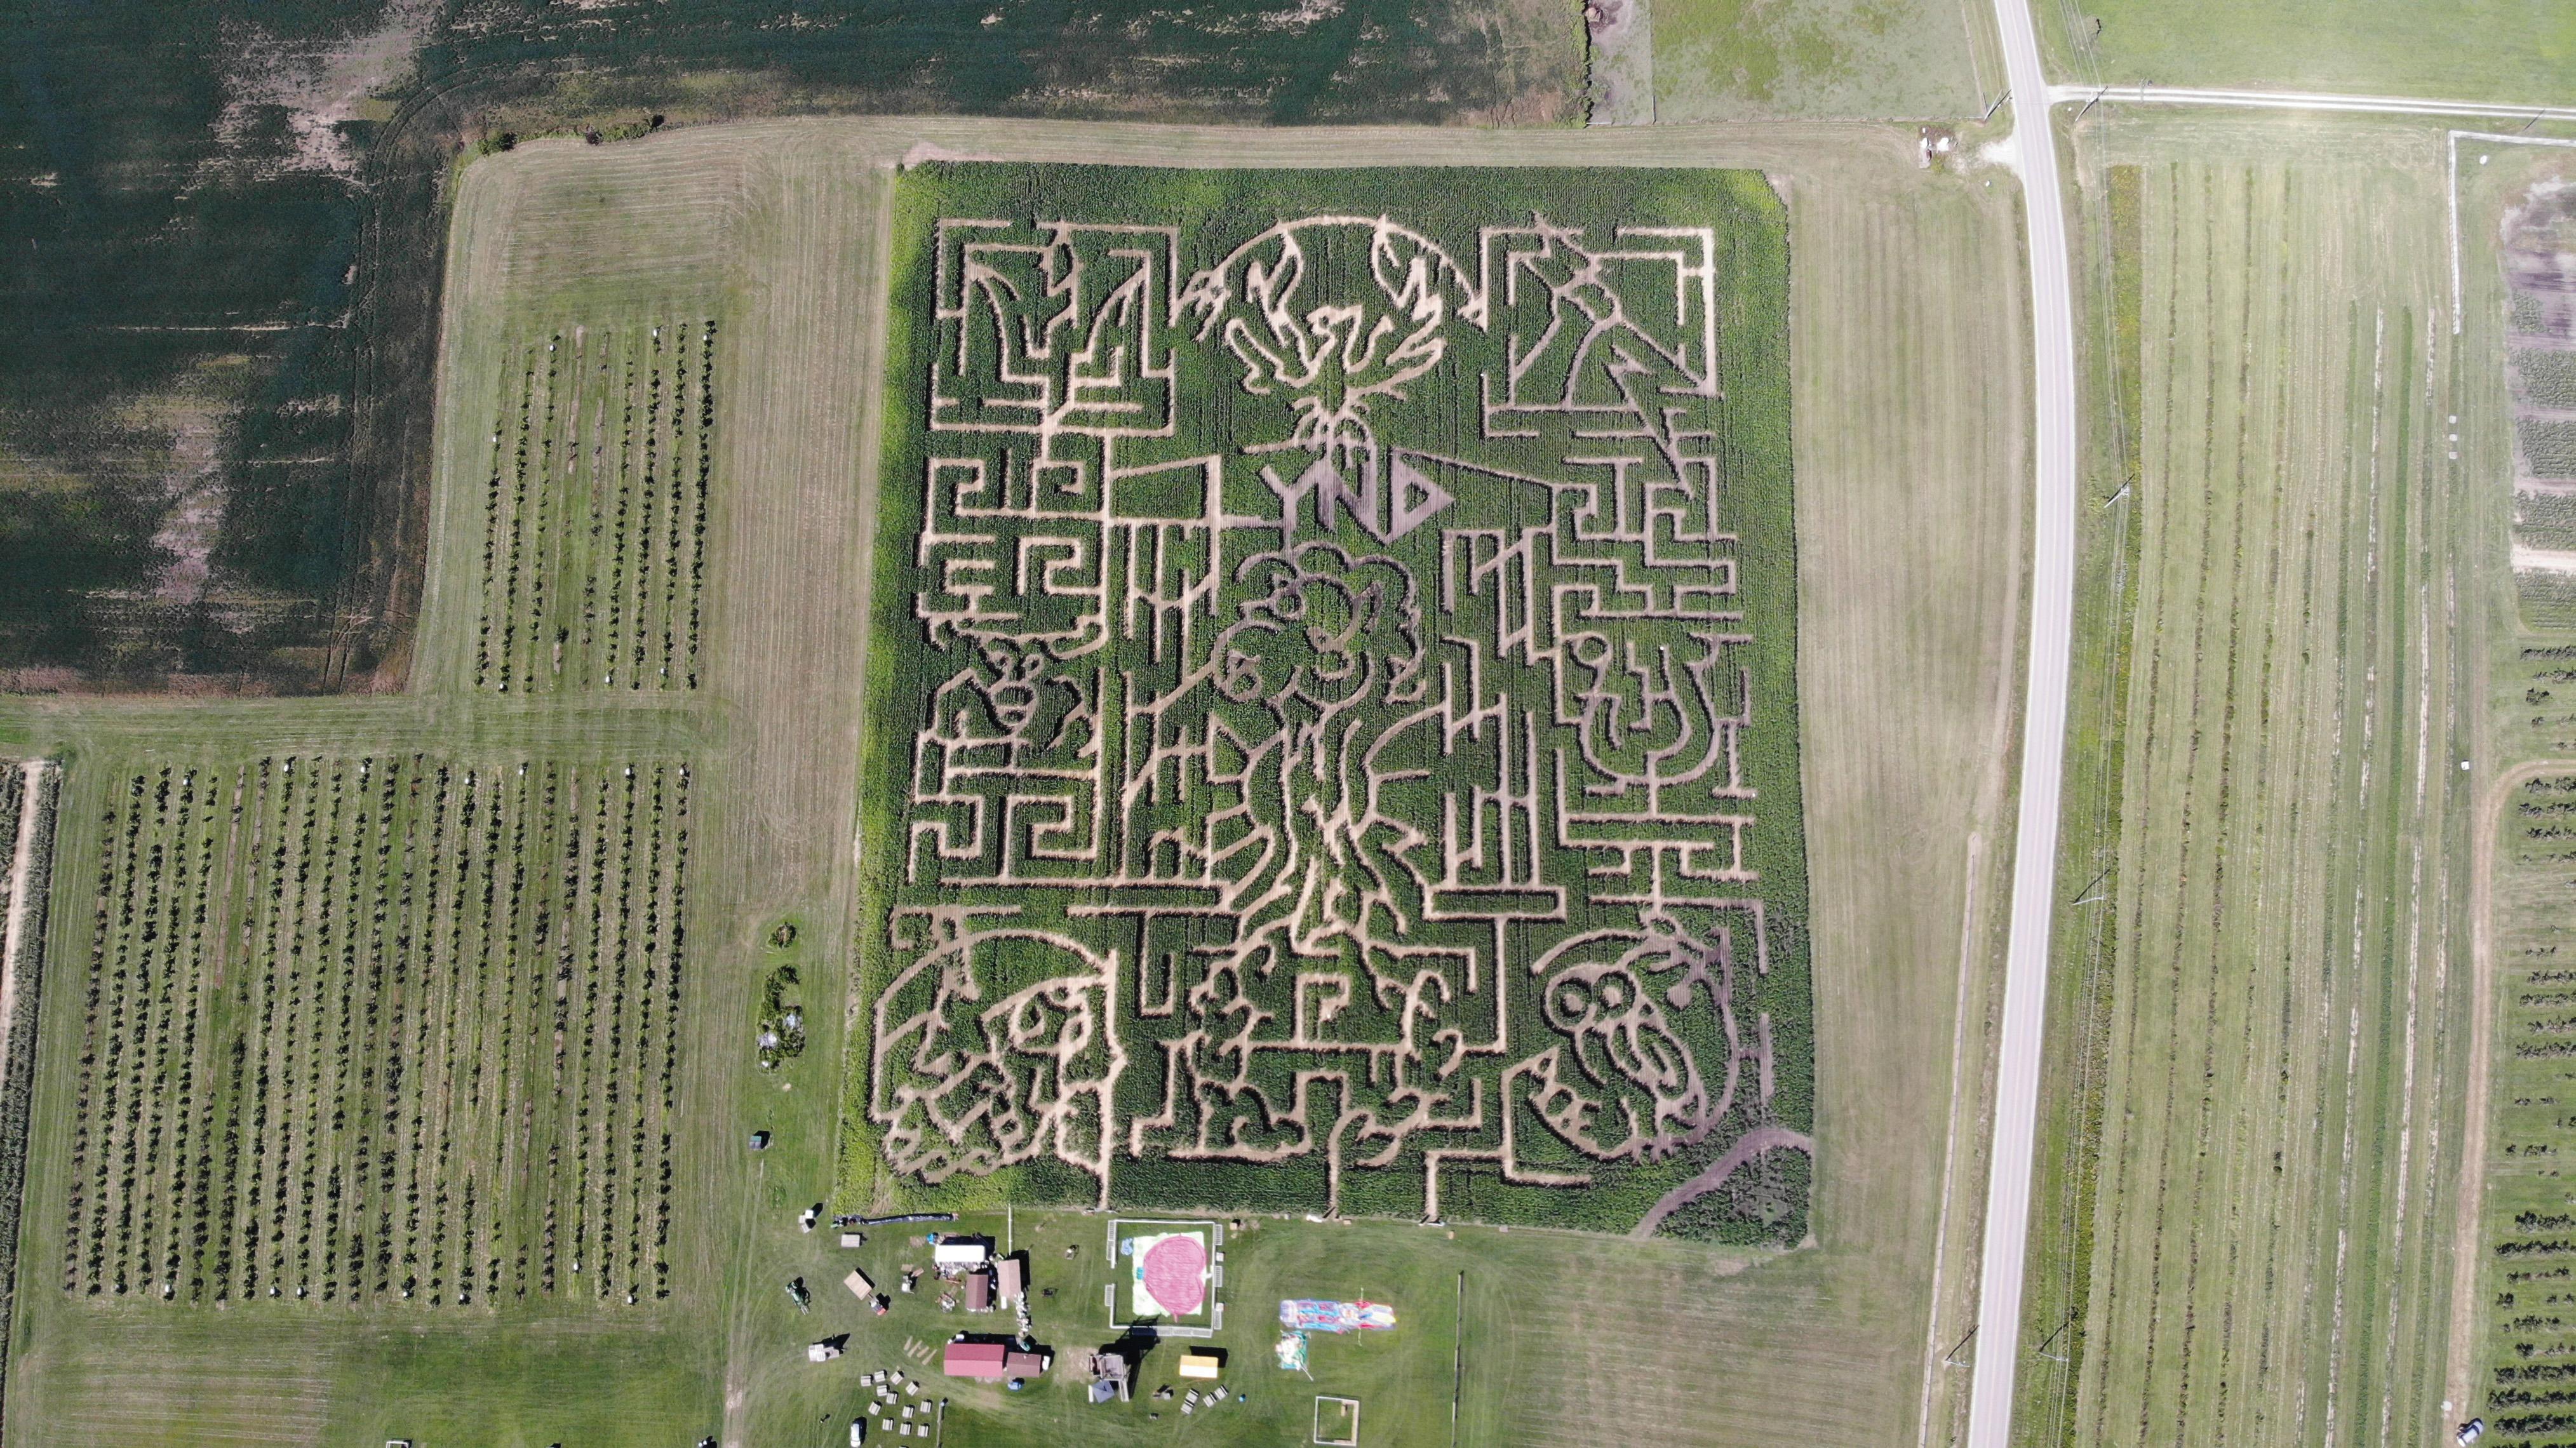 The maze at Lynd Fruit Farm is planted using a GPS device, rather than cut into the field after it grows (photo courtesy Lynd Fruit Farm).